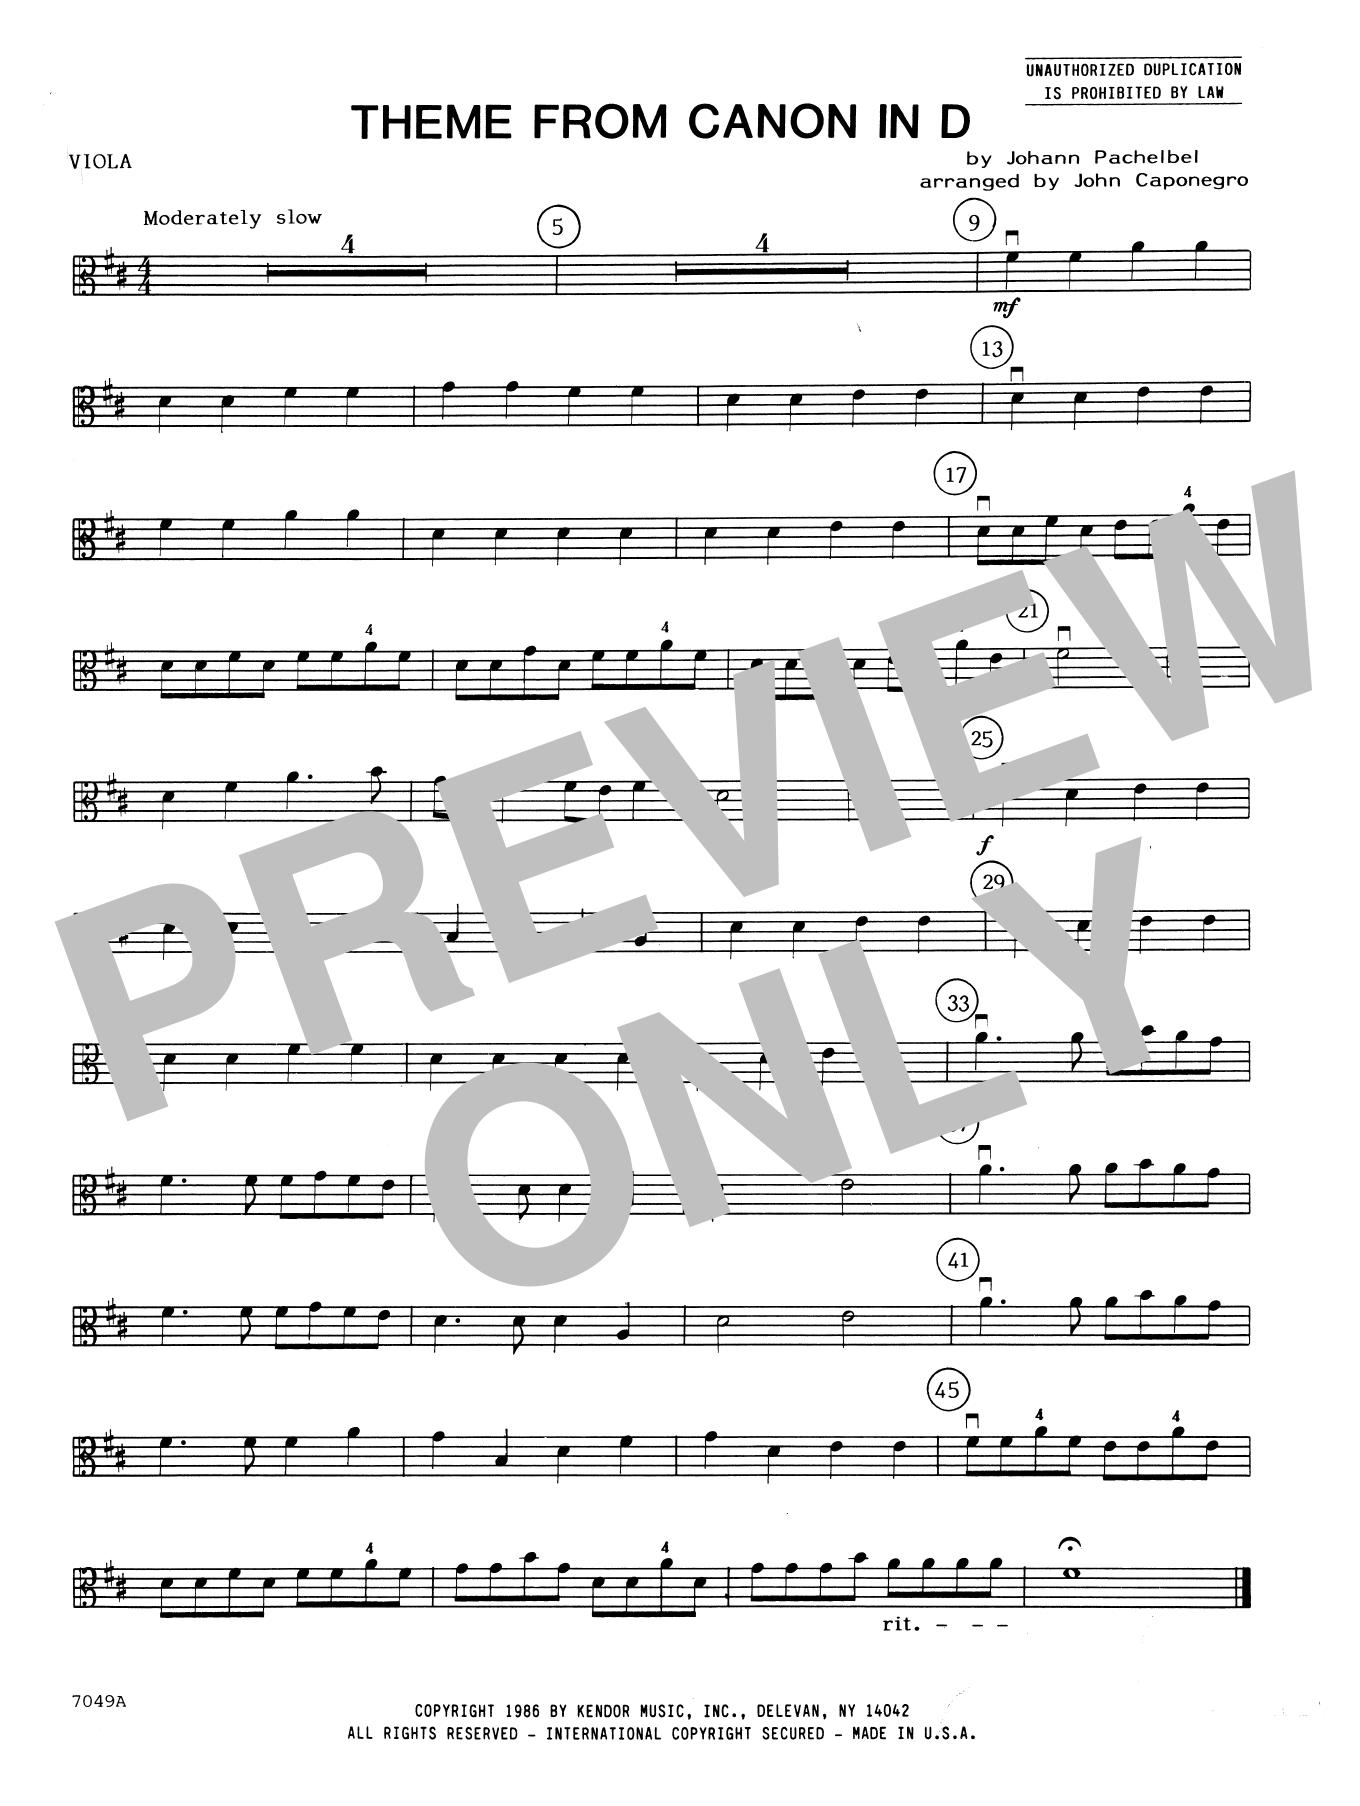 Download John Caponegro Theme From Canon In D - Viola Sheet Music